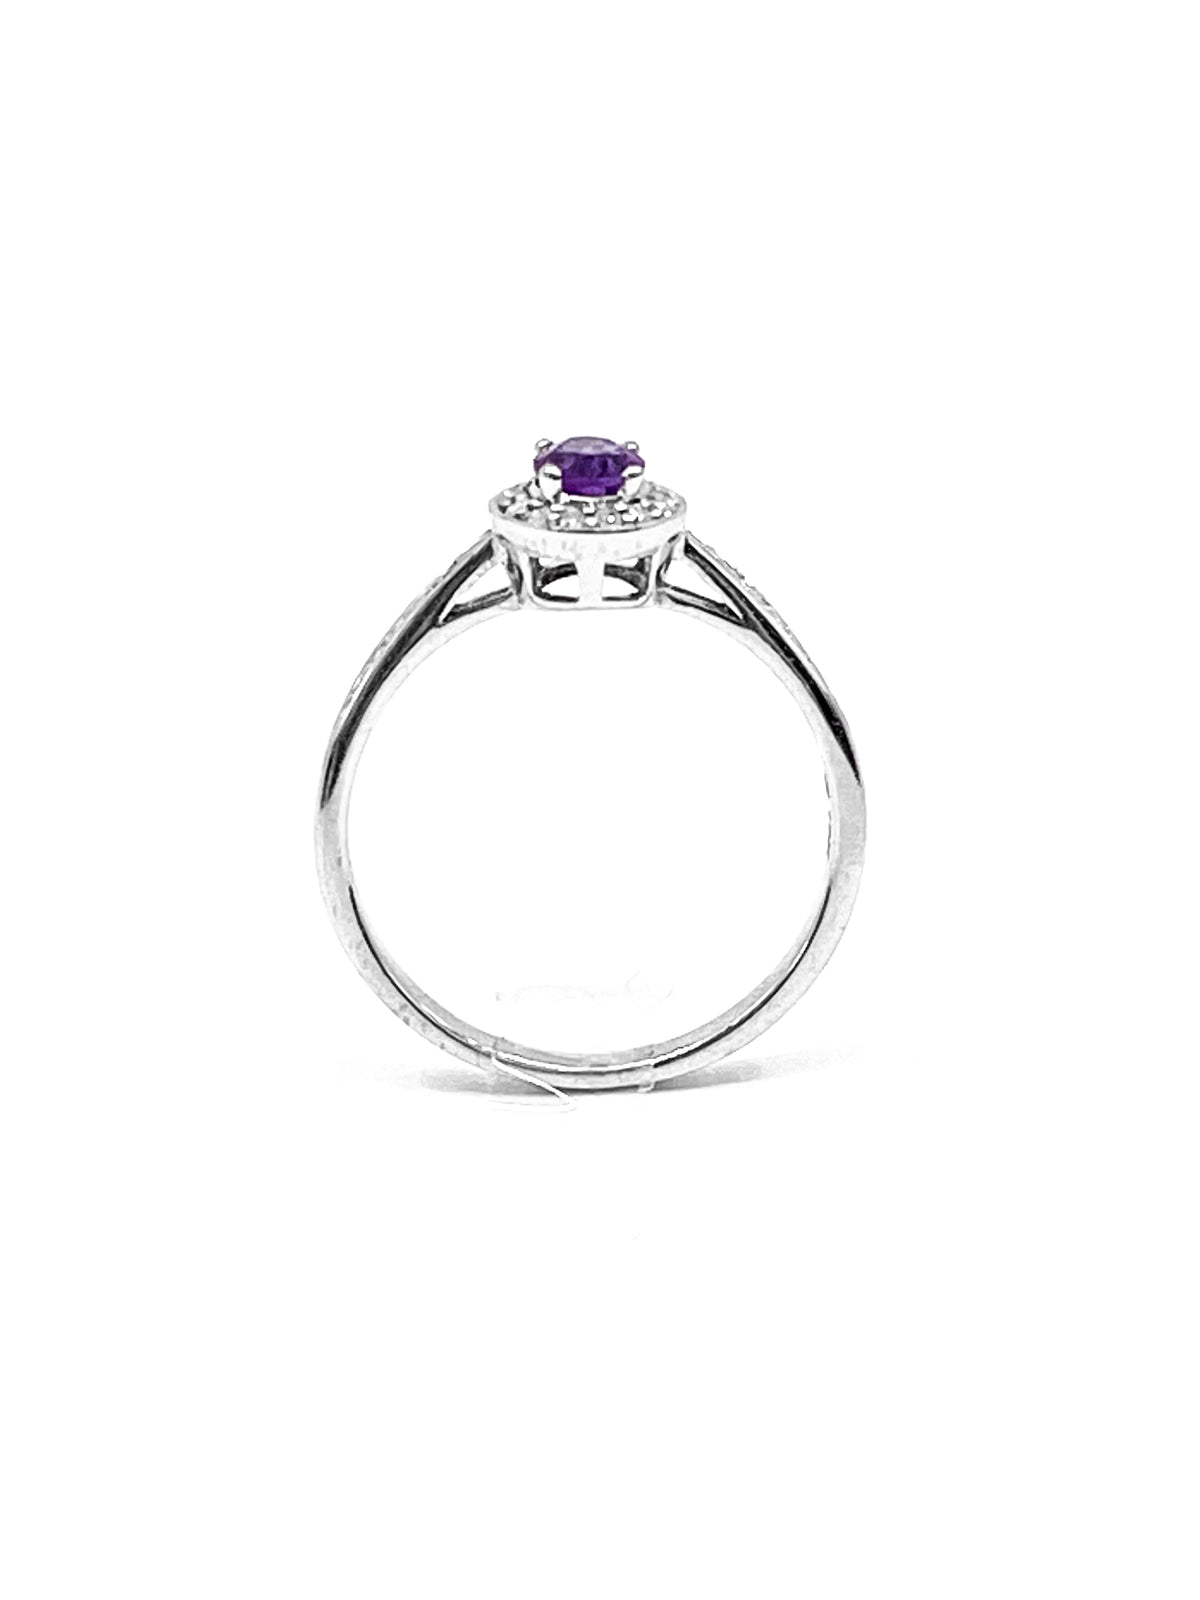 10K White Gold 0.30cttw Genuine Amethyst and 0.13cttw Diamond Halo Ring, size 6.5